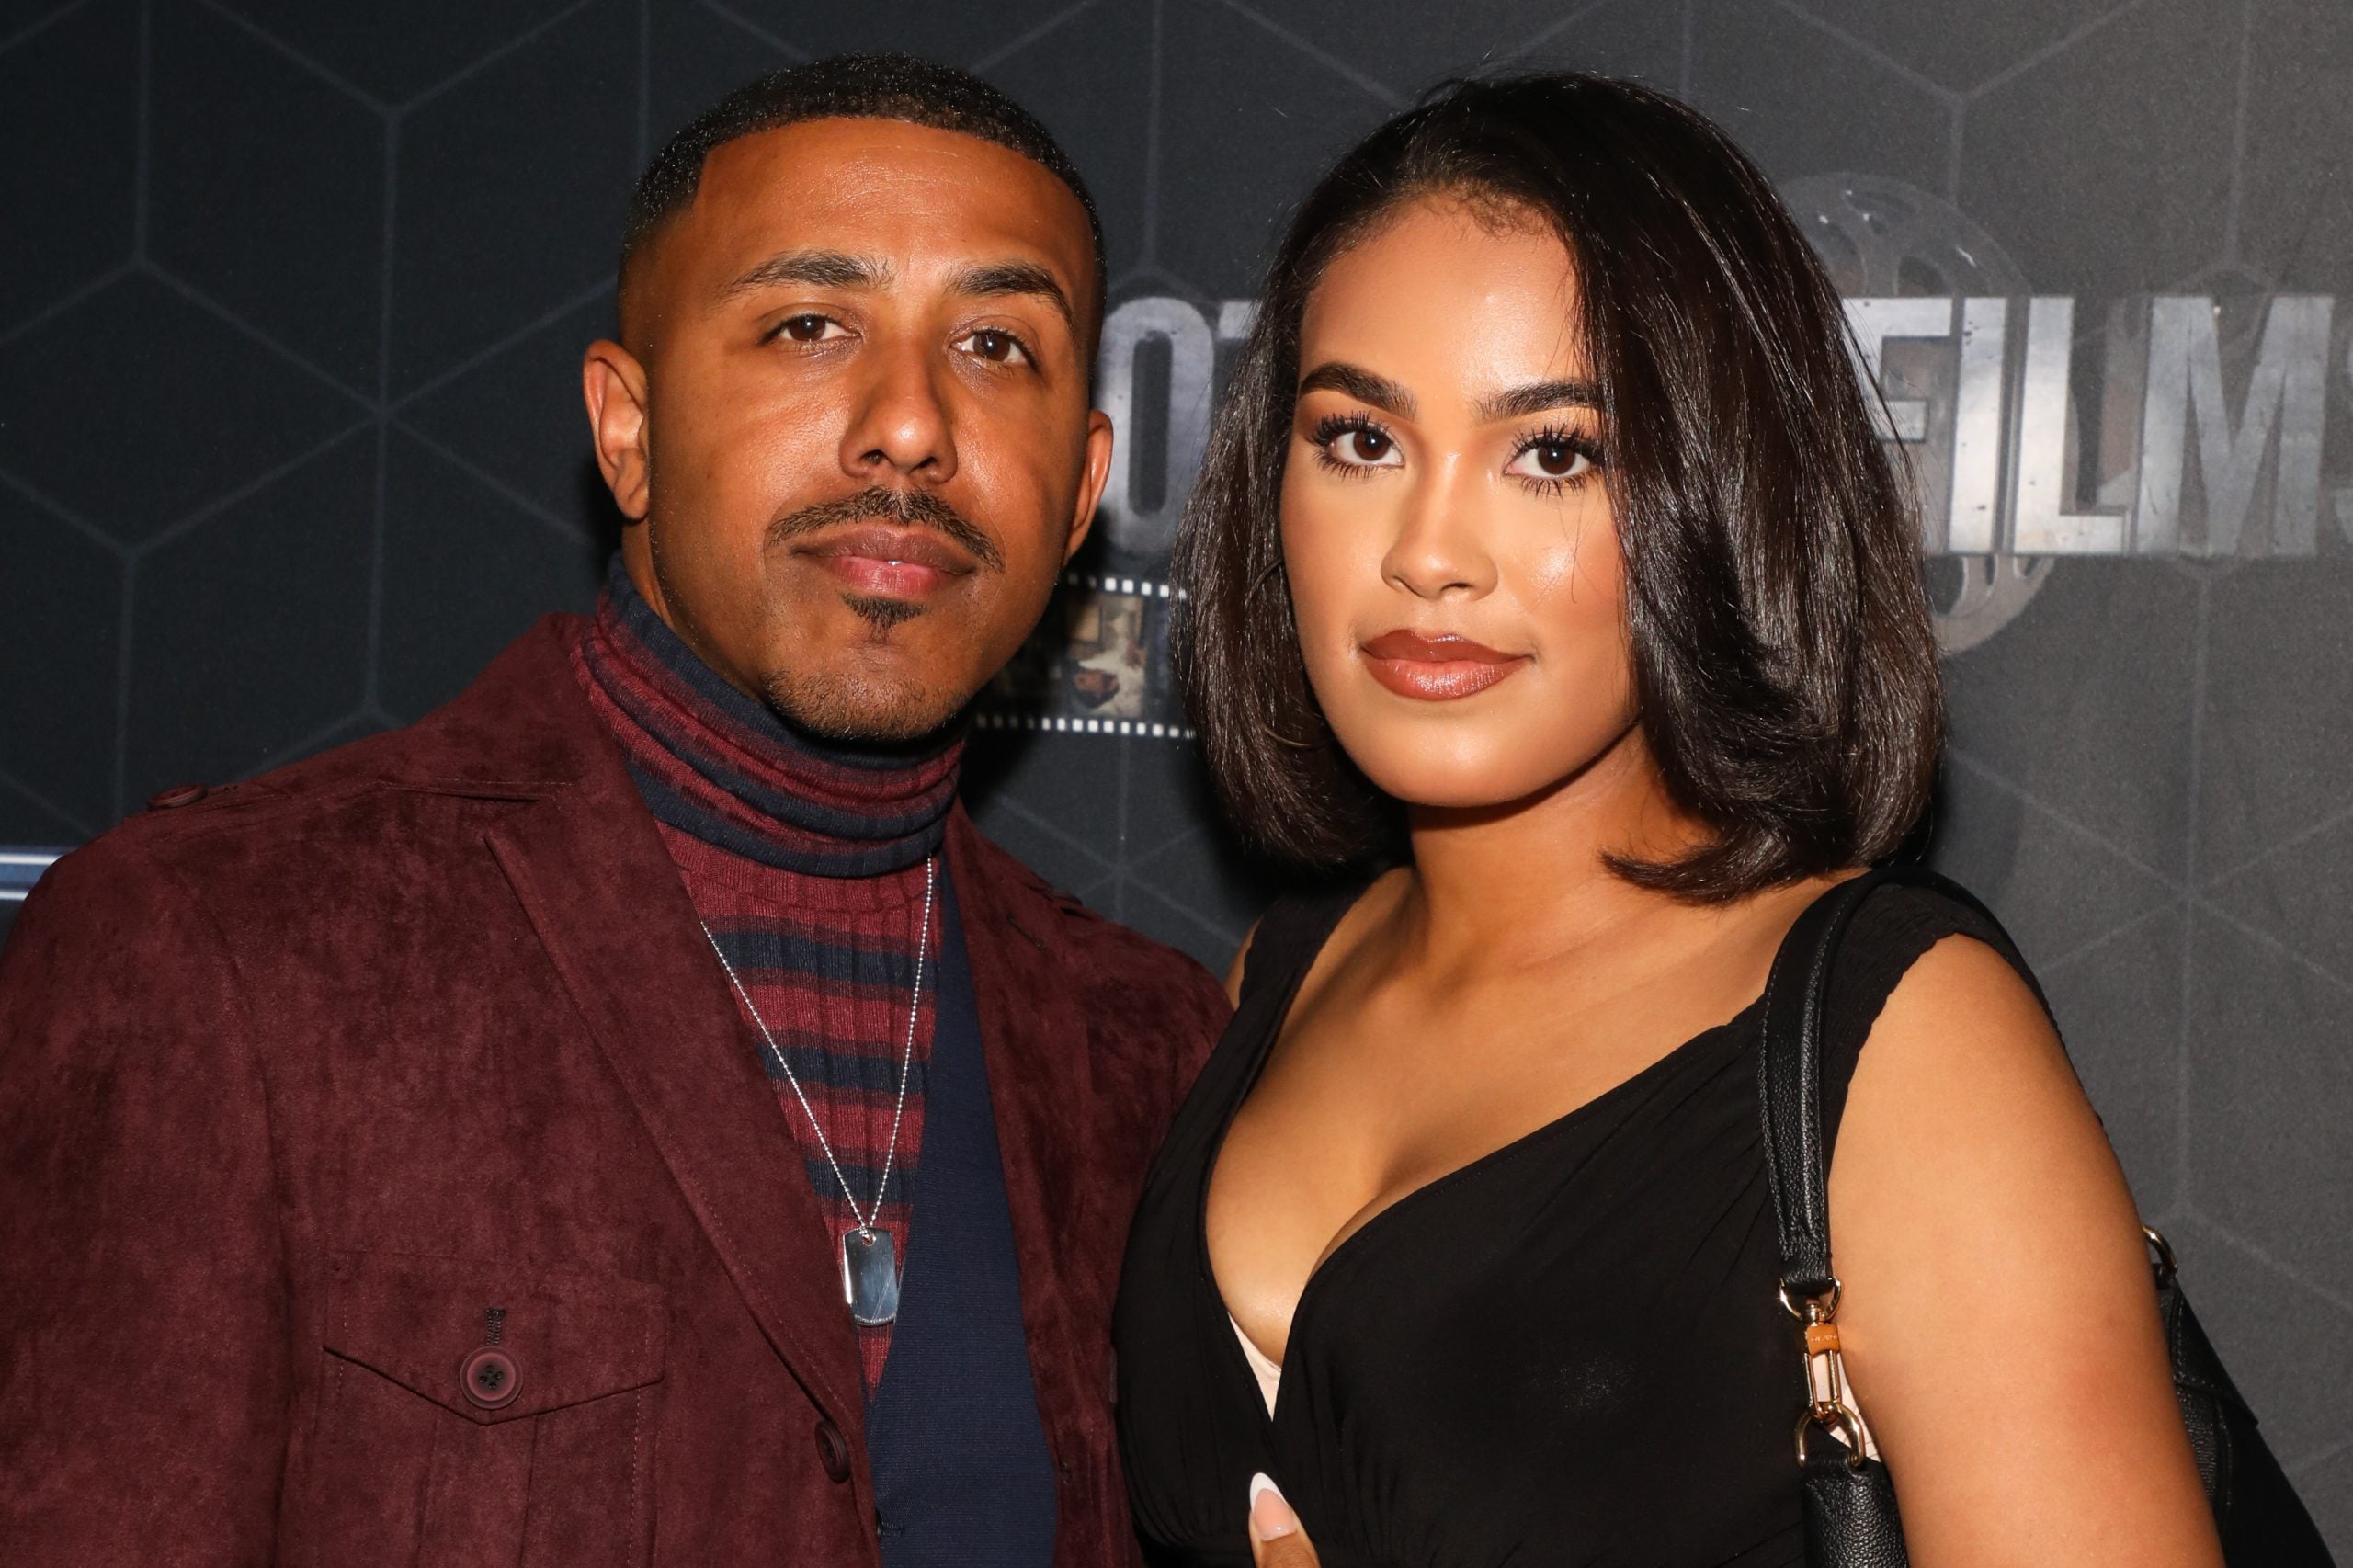 ‘People Don't Understand It’: Marques Houston Defends Marrying His Wife When She Was 19